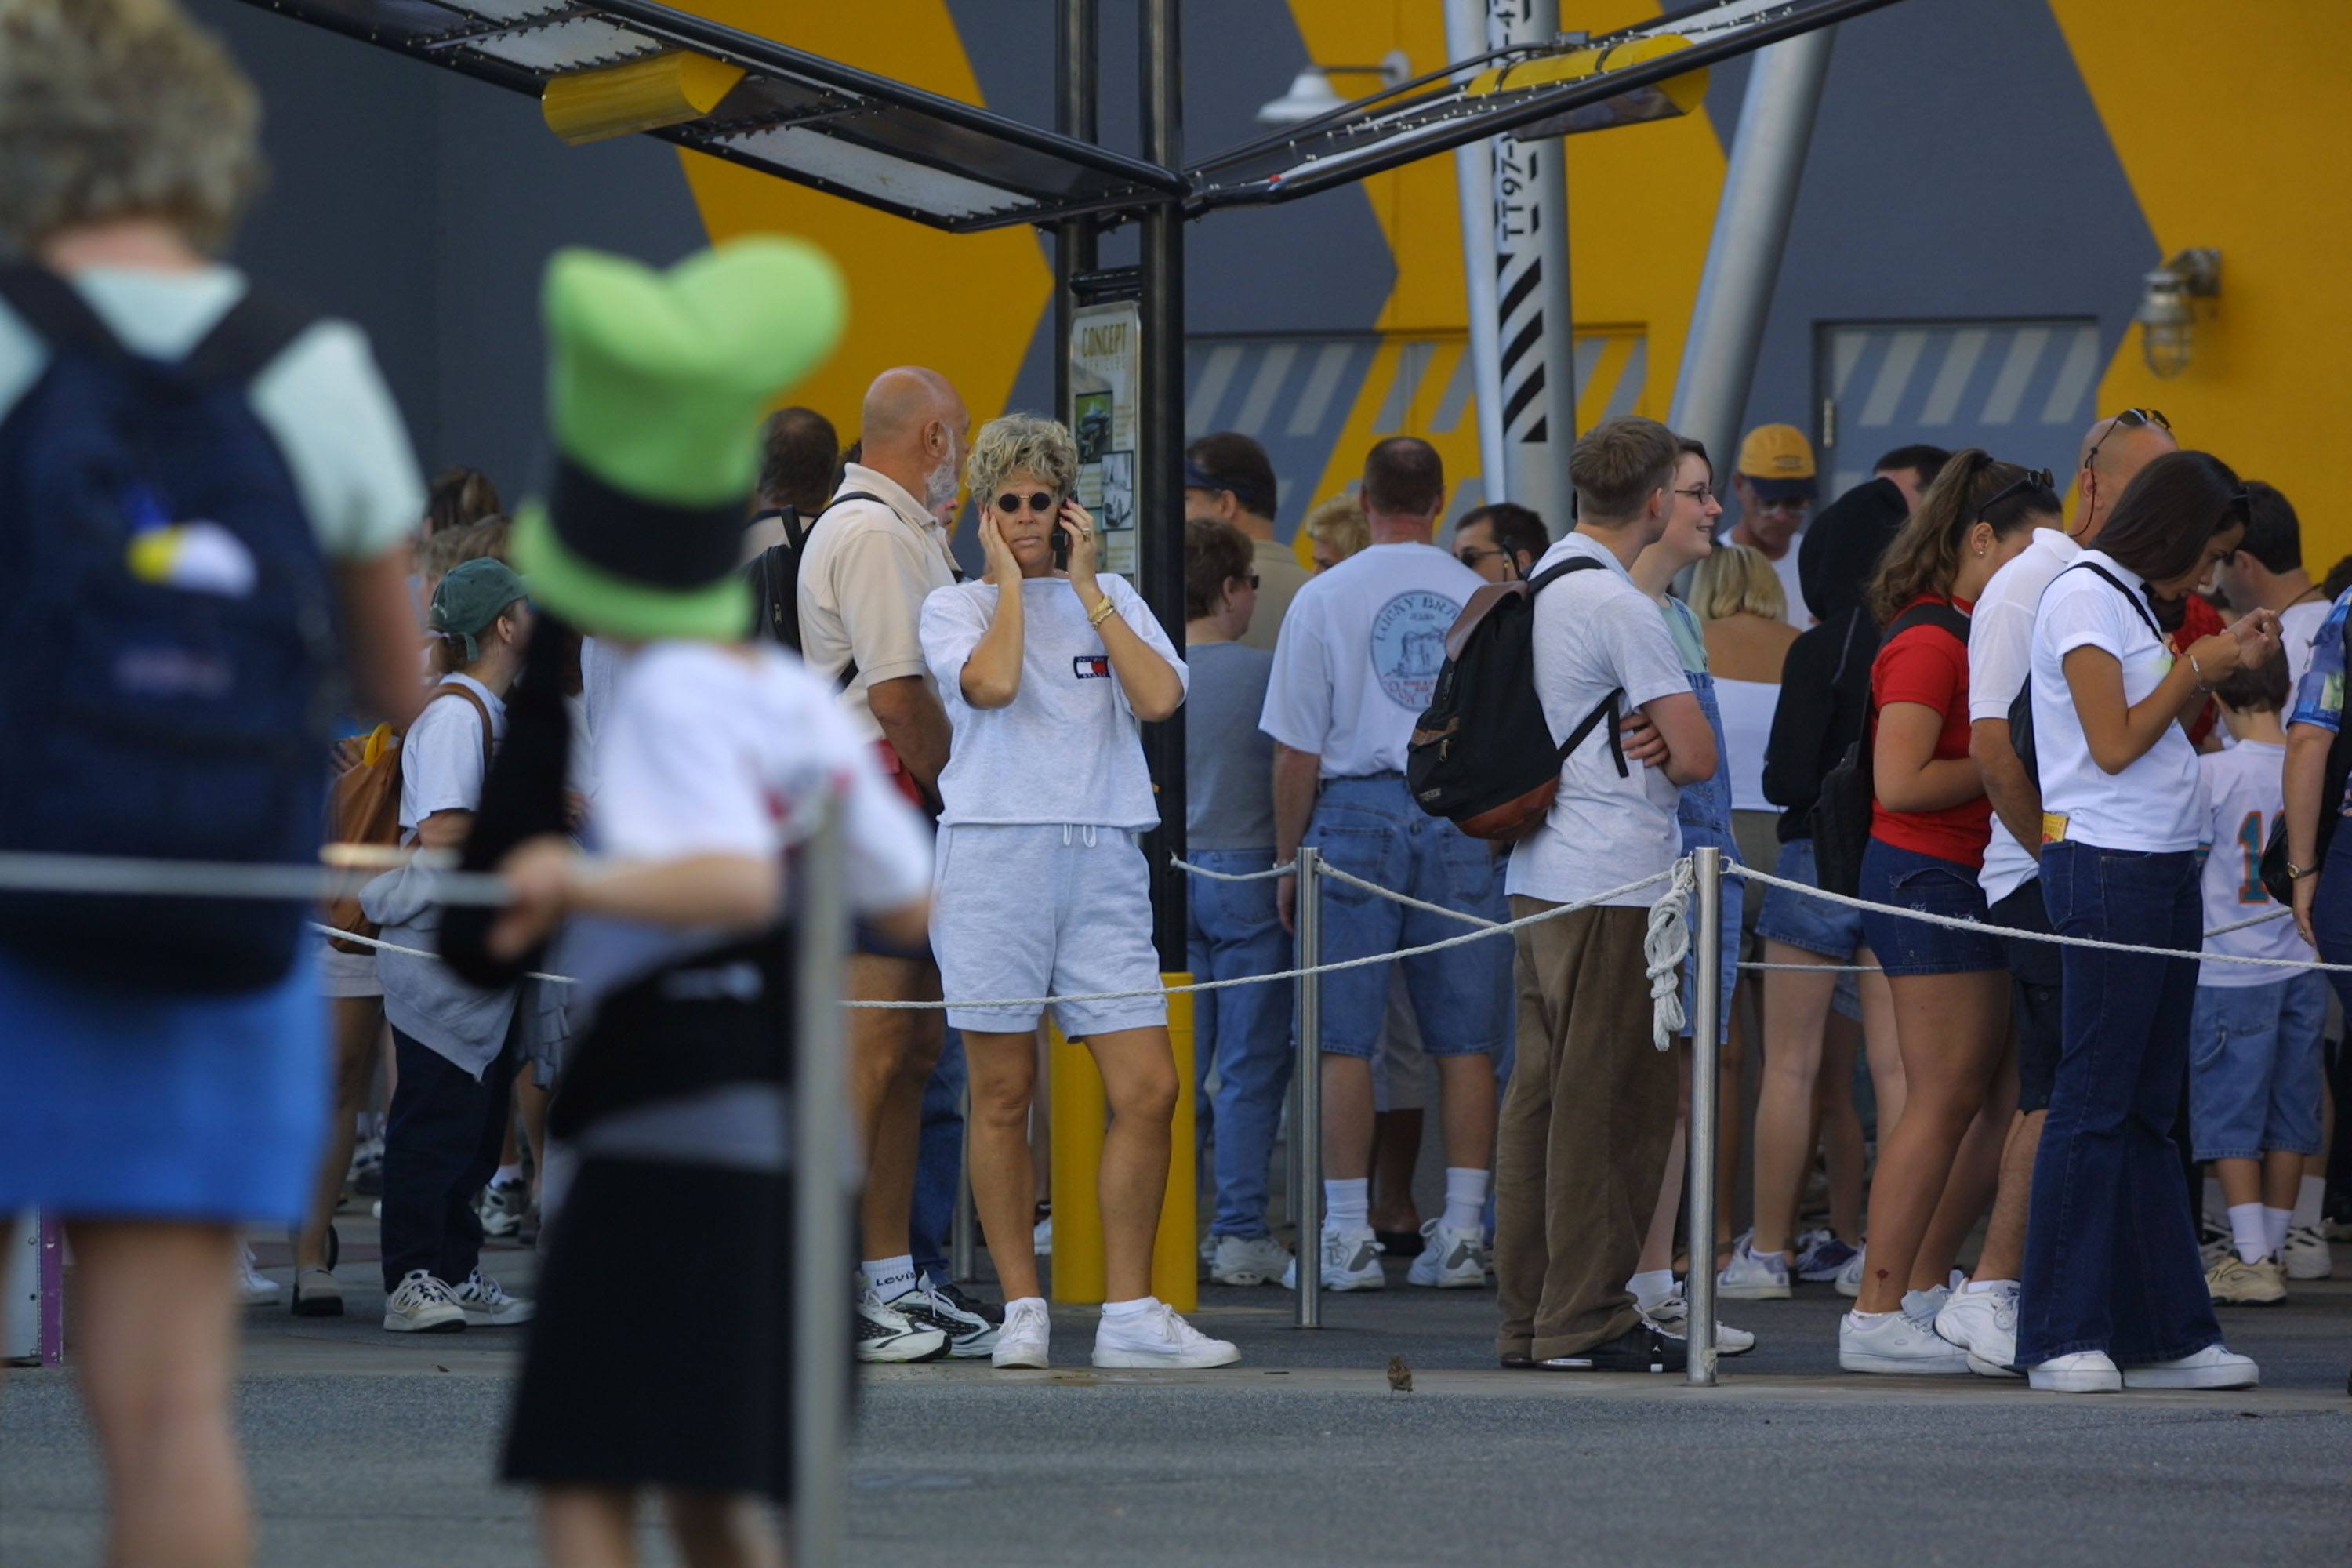 People stand in line at the Test Track ride at Walt Disney's Epcot Center